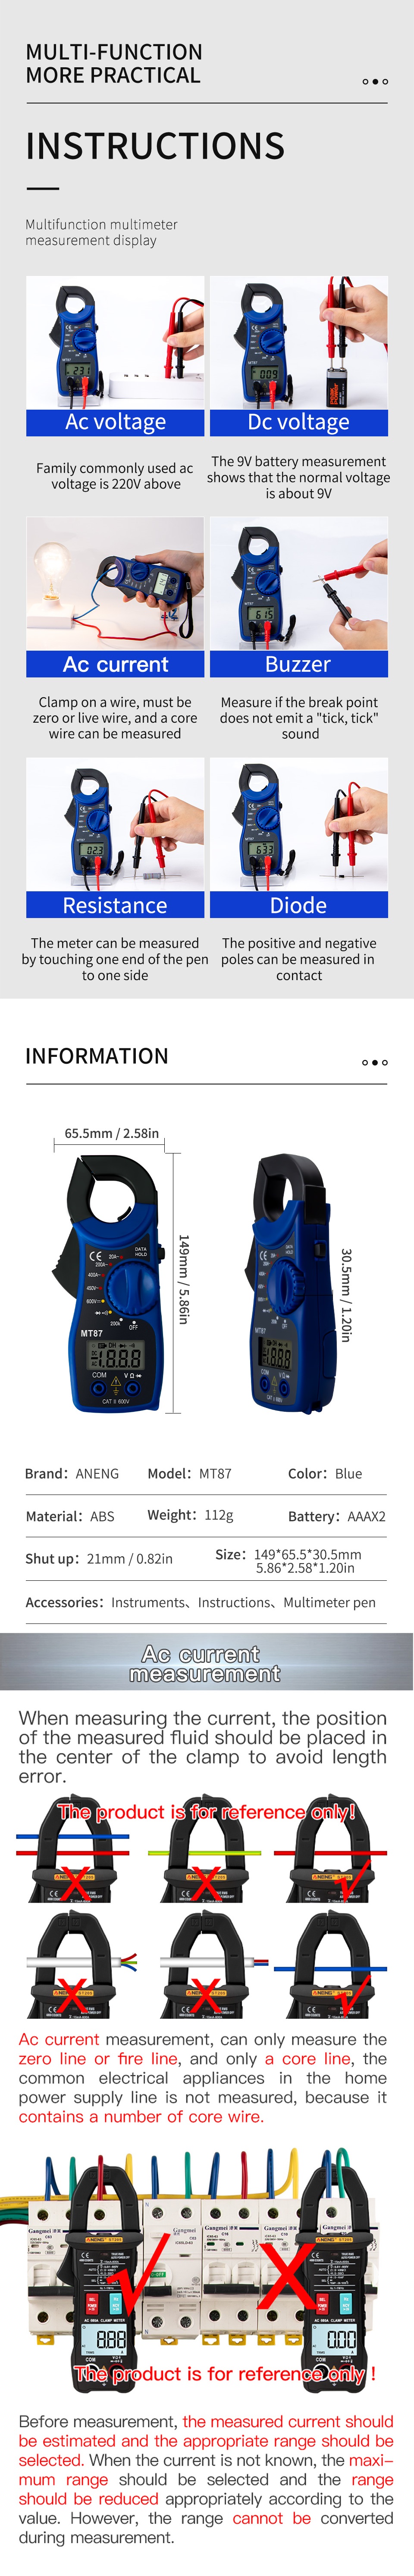 ANENG-MT87-Portable-Digital-Clamp-Ammeter-Multimeter-With-ACDC-Voltage-Tester-AC-Current-Resistance--1605180-3